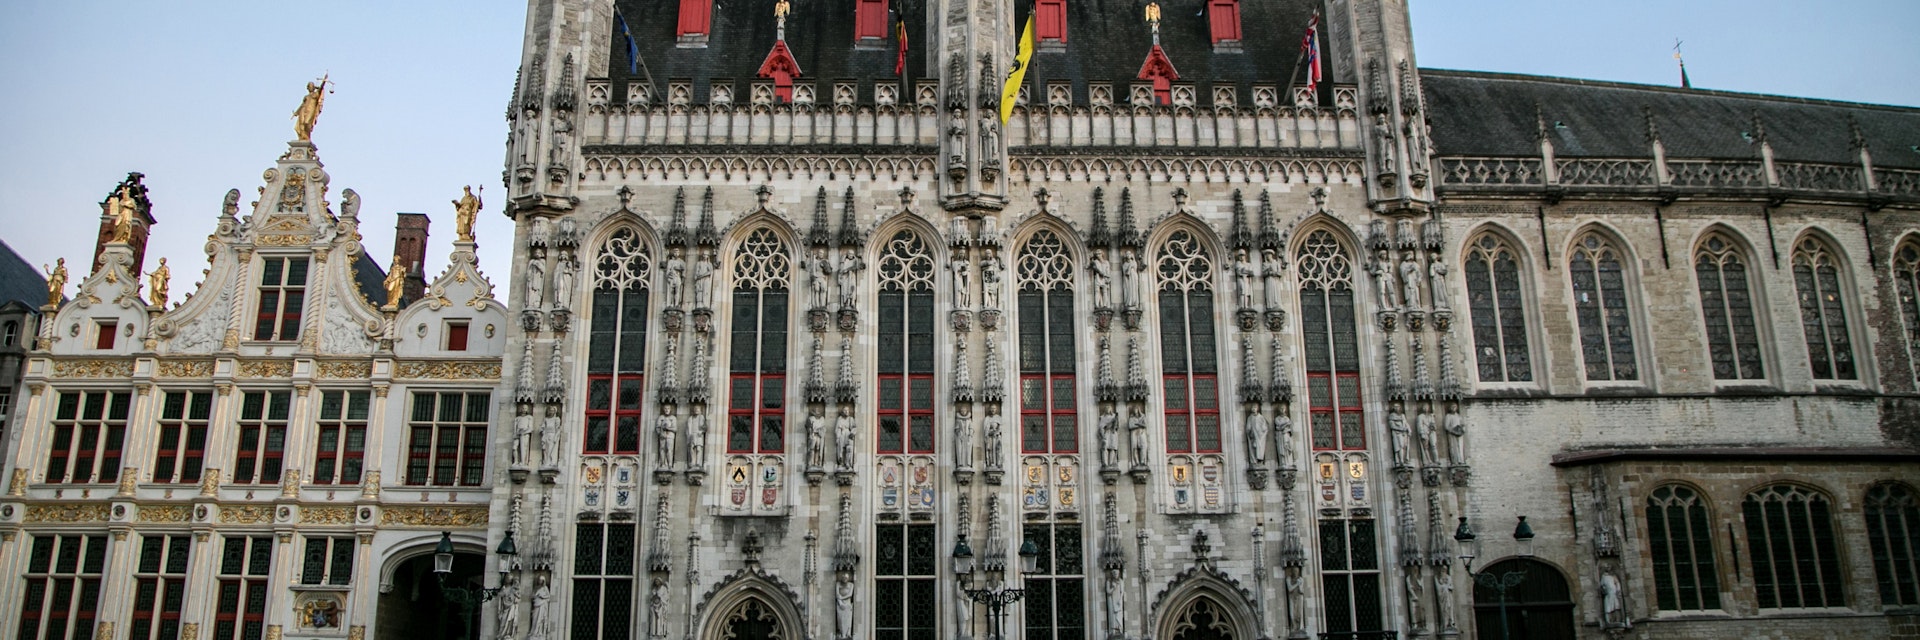 View of Town Hall of Brugge